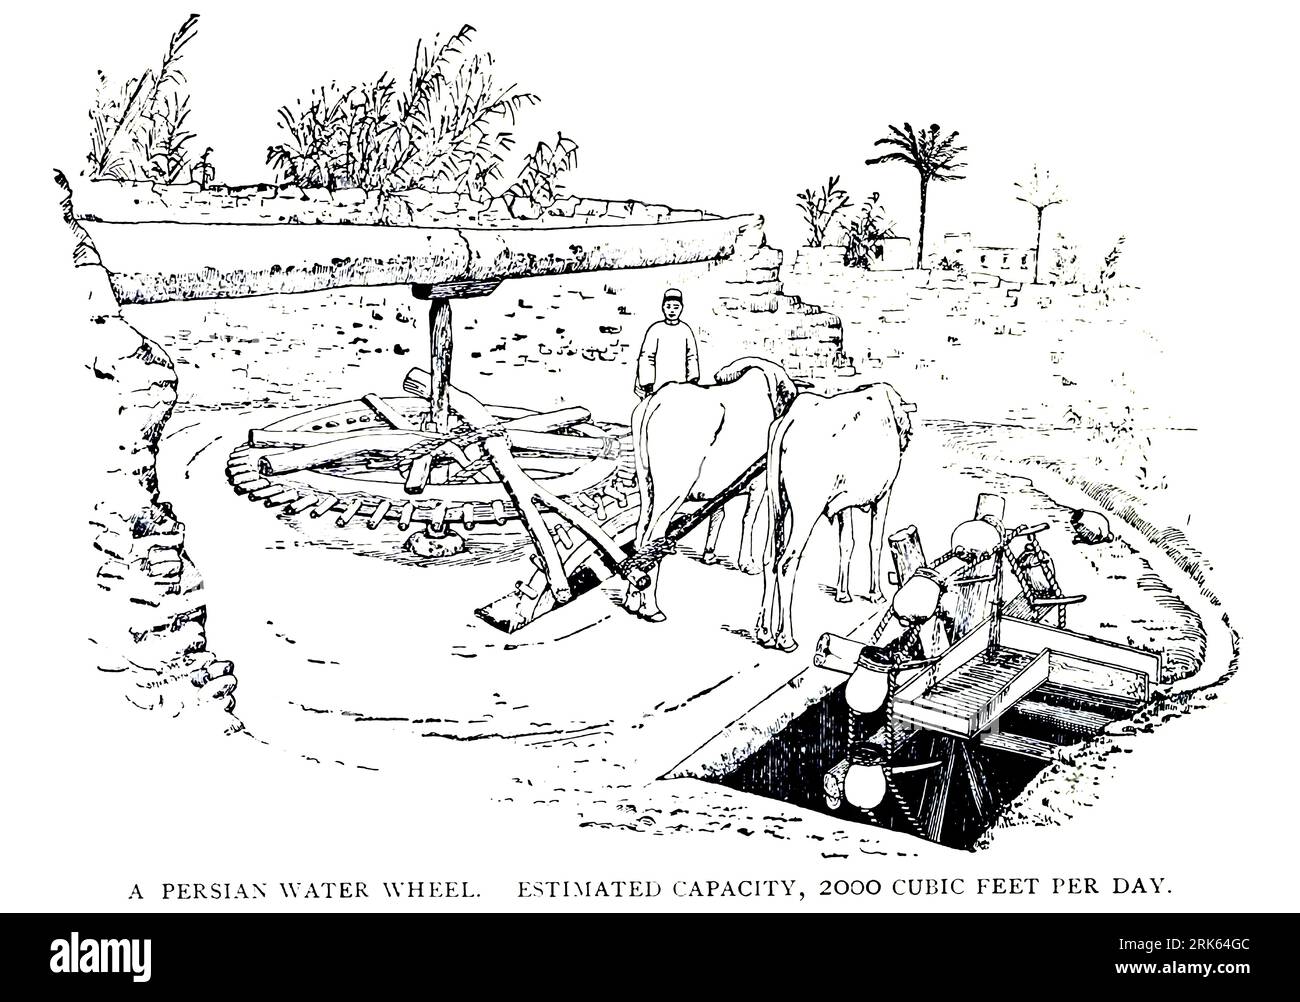 sketch of an Ancient Persian water wheel powered by livestock from the Article PUMP IRRIGATION ON THE GREAT PLAINS. By H. V. Hinckley. from The Engineering Magazine DEVOTED TO INDUSTRIAL PROGRESS Volume XI October 1896 NEW YORK The Engineering Magazine Co Stock Photo